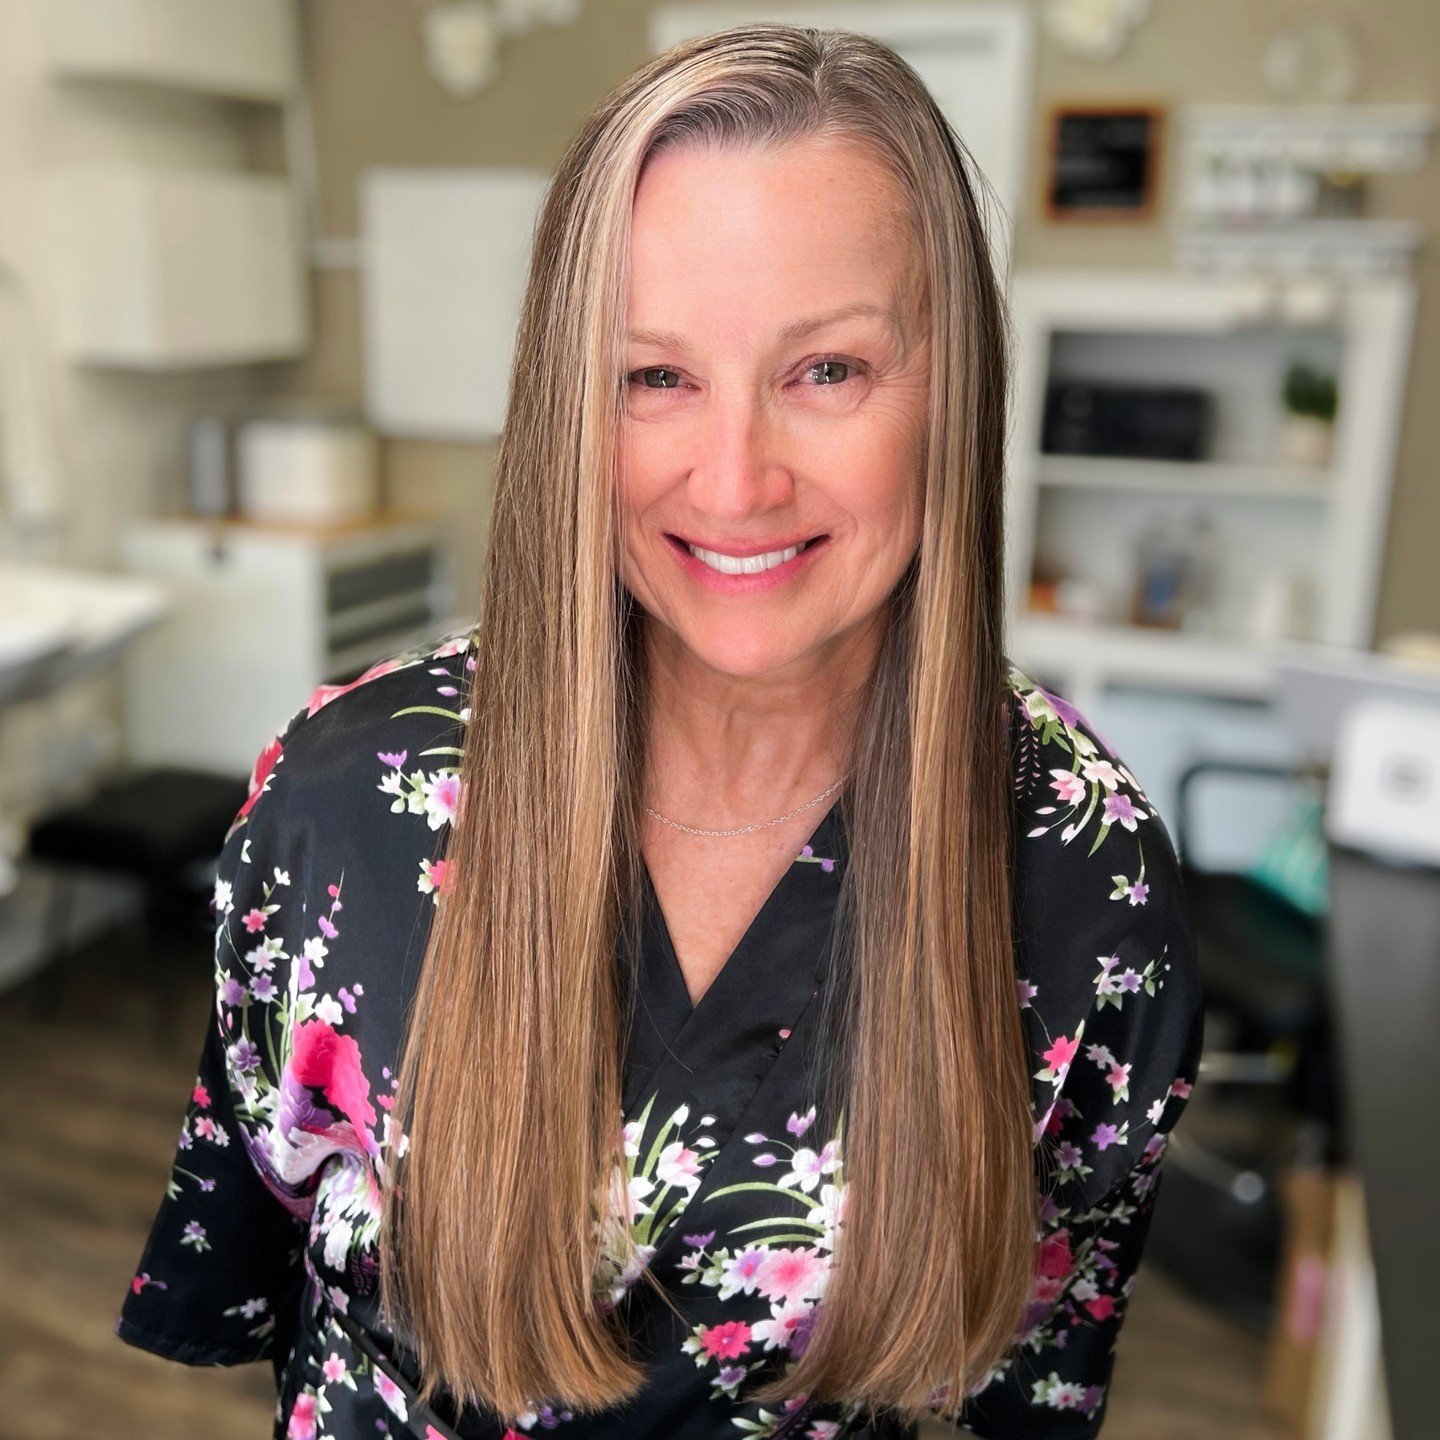 Blending grays with highlights: Is it right for you?

Instead of using one solid color to cover up grays, you can strategically add lighter highlights to areas with the highest concentration of grays. This approach helps to diffuse the appearance of 